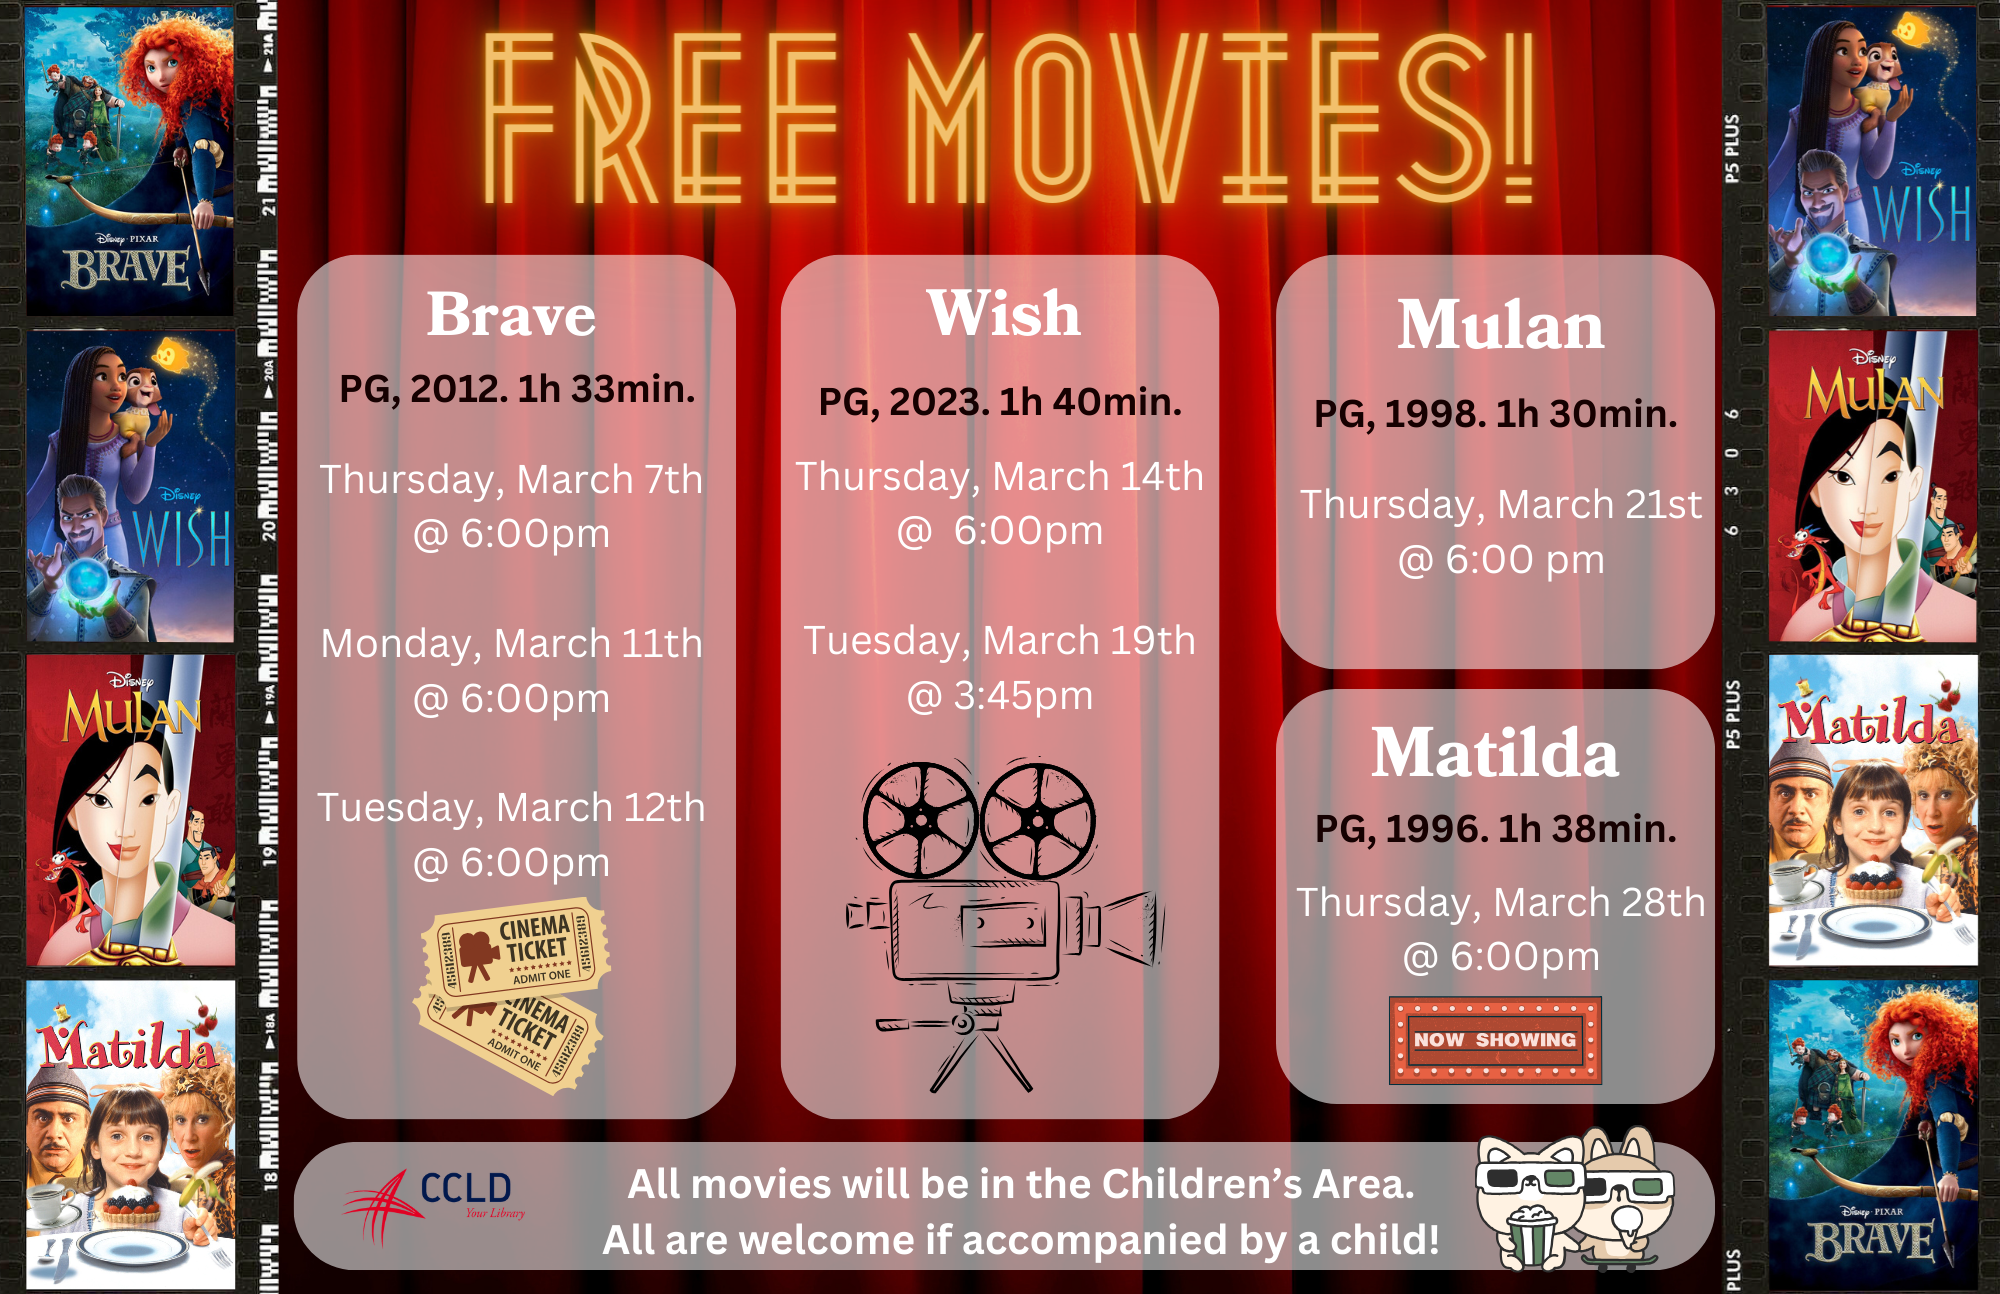 Join us to watch Disney's "Brave"! 
Rated PG, 2012.
Snacks and water provided. All are welcome if accompanied by a child!